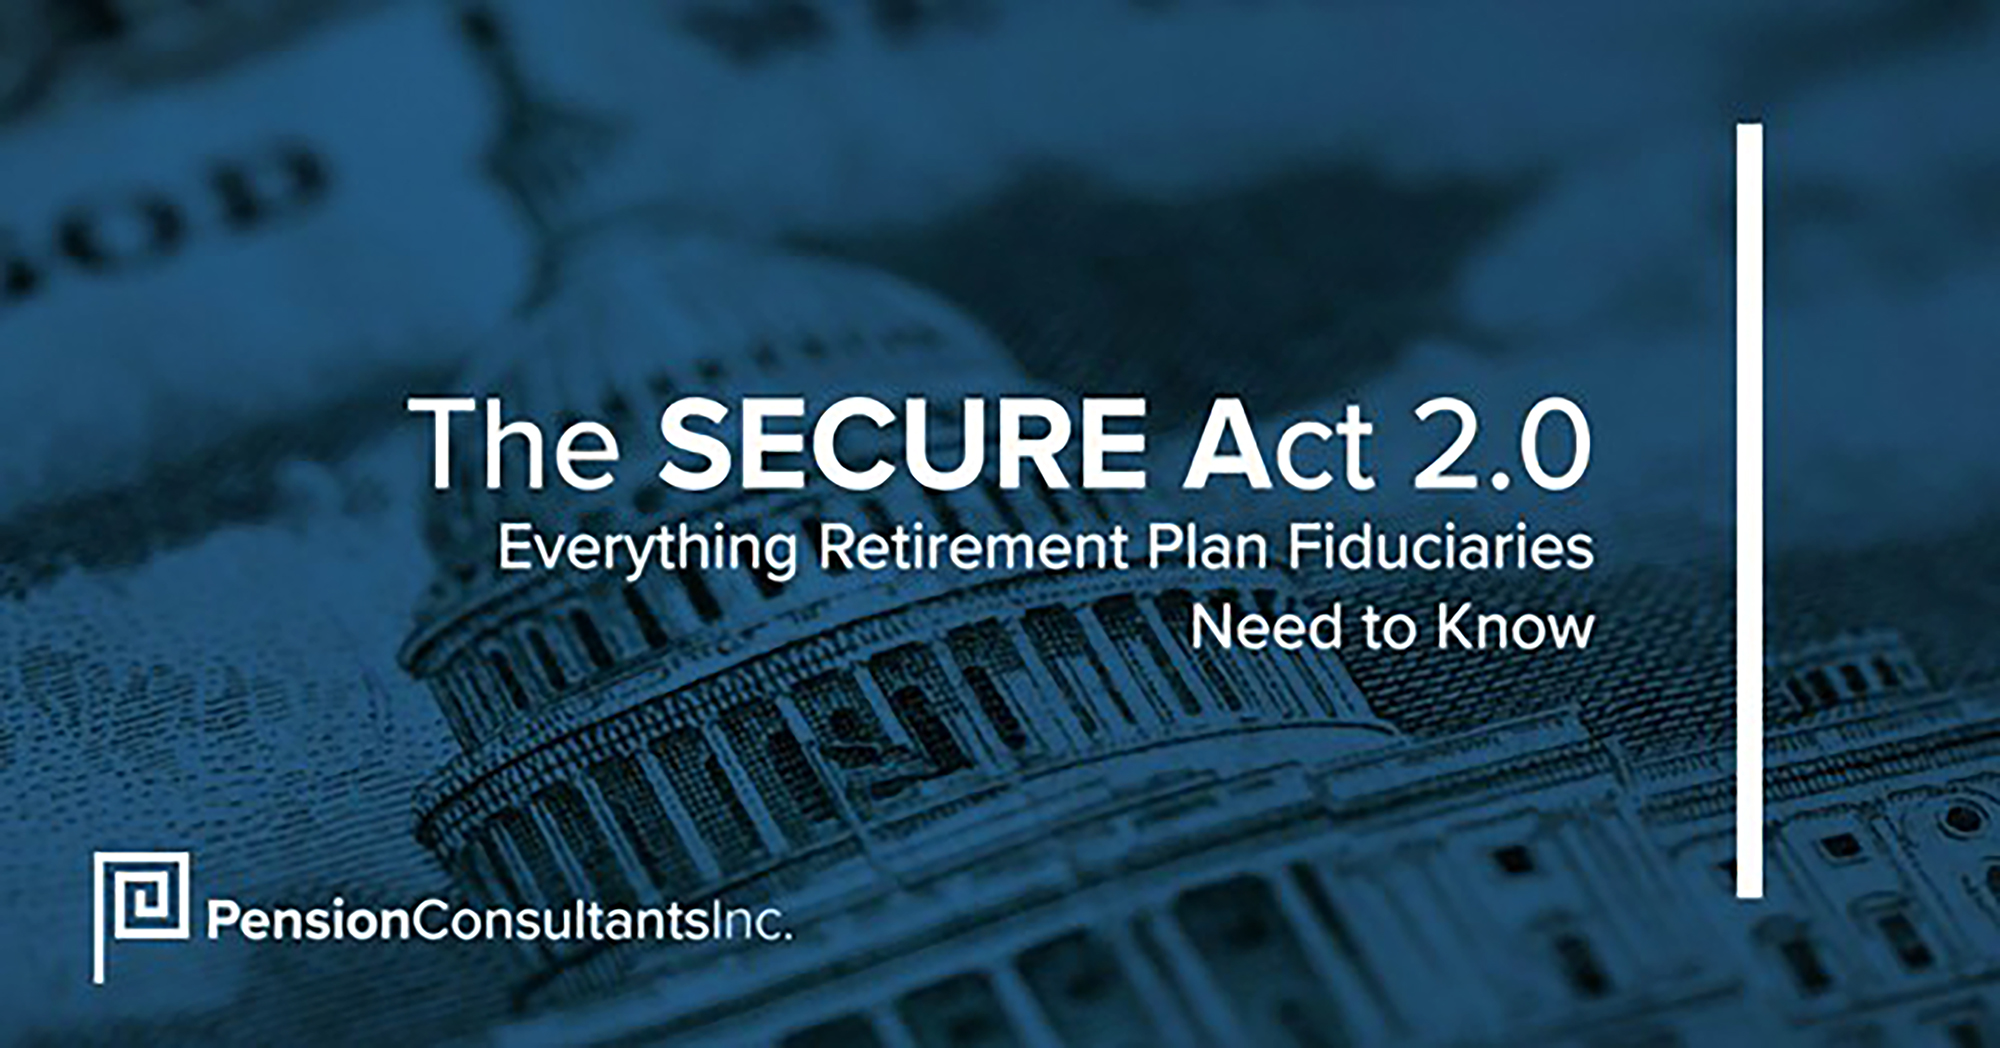 SECURE 2.0: Everything Retirement Plan Fiduciaries Need to Know